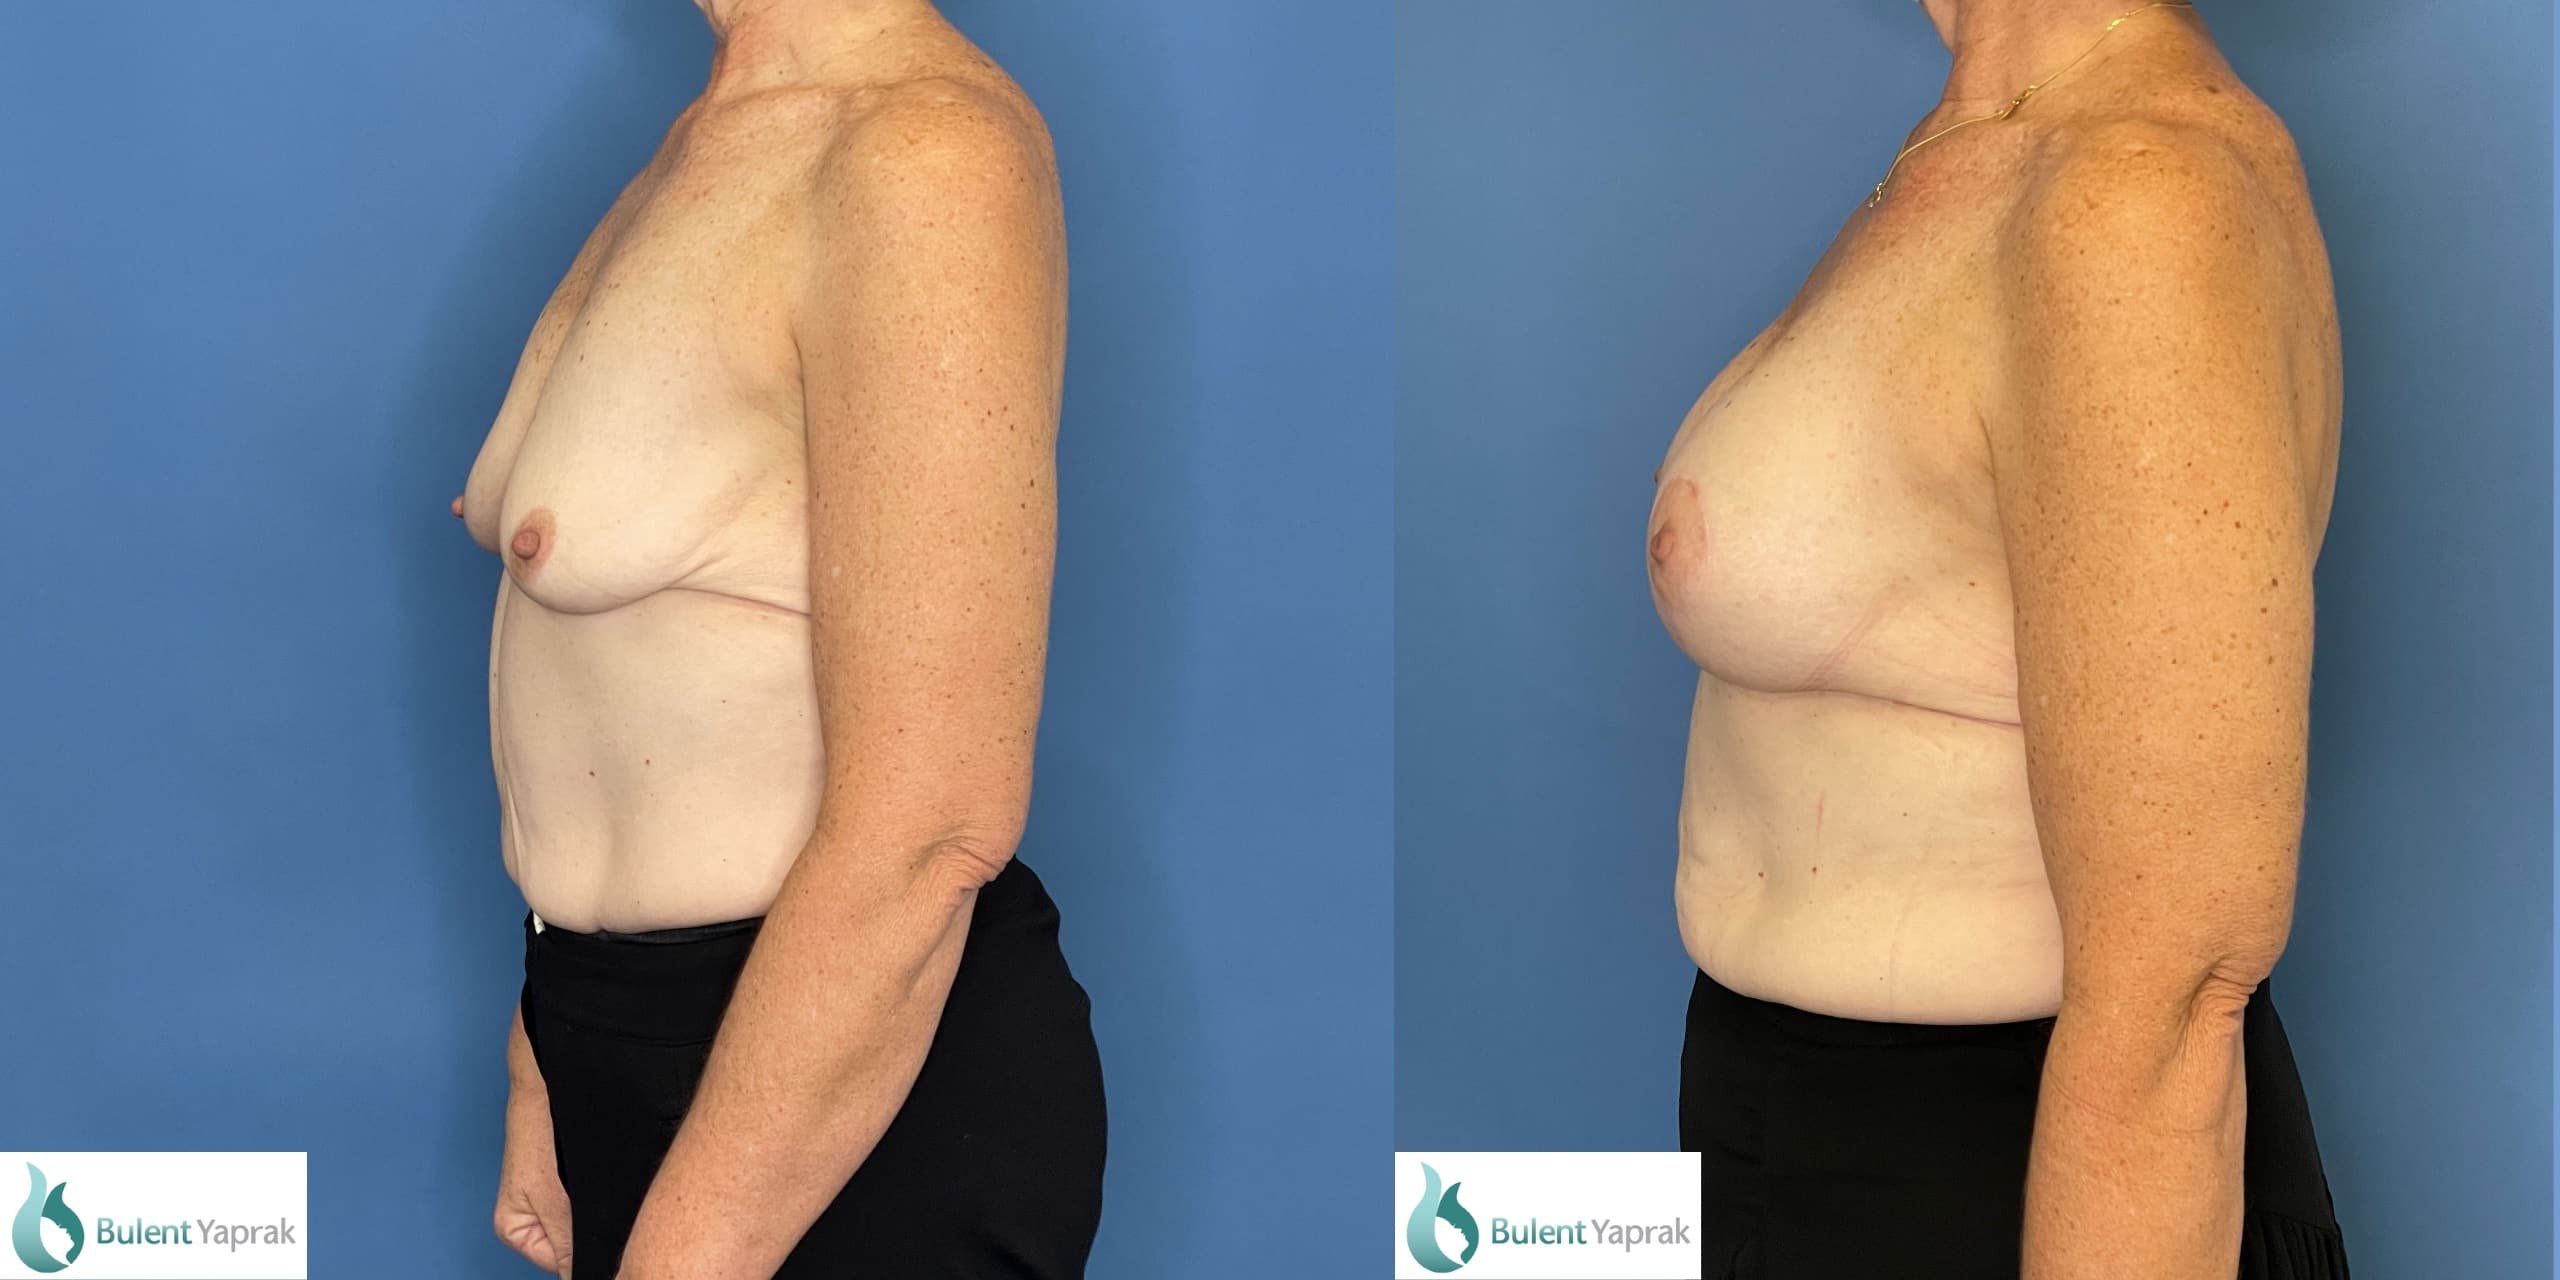 Side view of breast implants and mastopexy- breast lift. Before and after photos